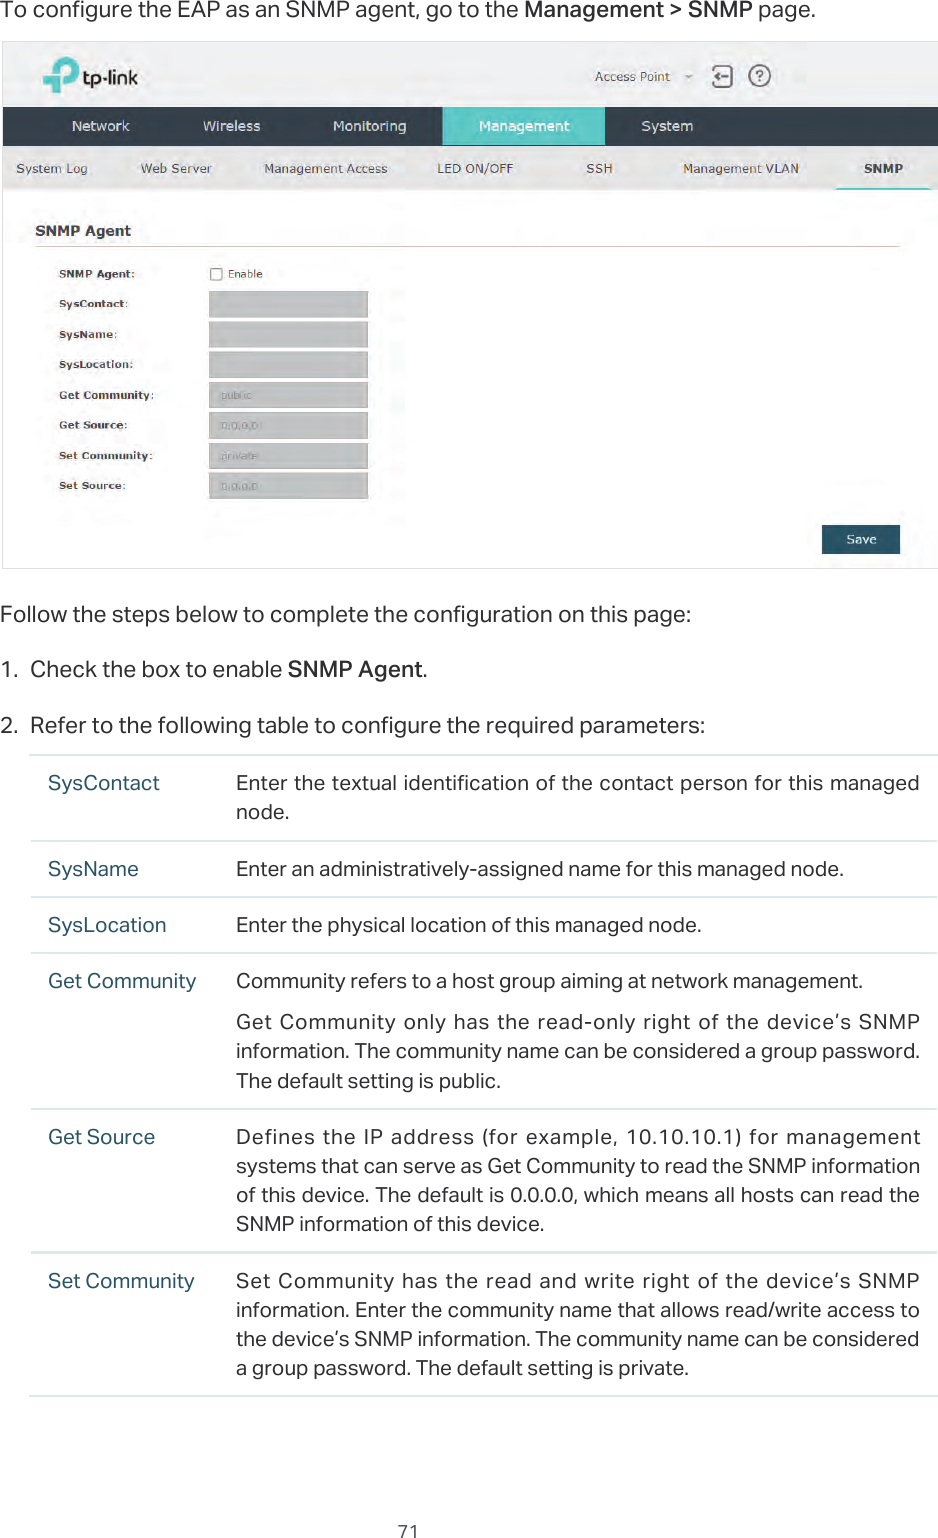  71To configure the EAP as an SNMP agent, go to the Management &gt; SNMP page.Follow the steps below to complete the configuration on this page:1. Check the box to enable SNMP Agent.2. Refer to the following table to configure the required parameters:SysContact Enter the textual identification of the contact person for this managed node.SysName Enter an administratively-assigned name for this managed node.SysLocation Enter the physical location of this managed node.Get Community Community refers to a host group aiming at network management.Get Community only has the read-only right of the device’s SNMP information. The community name can be considered a group password. The default setting is public.Get Source Defines the IP address (for example, 10.10.10.1) for management systems that can serve as Get Community to read the SNMP information of this device. The default is 0.0.0.0, which means all hosts can read the SNMP information of this device.Set Community Set Community has the read and write right of the device’s SNMP information. Enter the community name that allows read/write access to the device’s SNMP information. The community name can be considered a group password. The default setting is private.